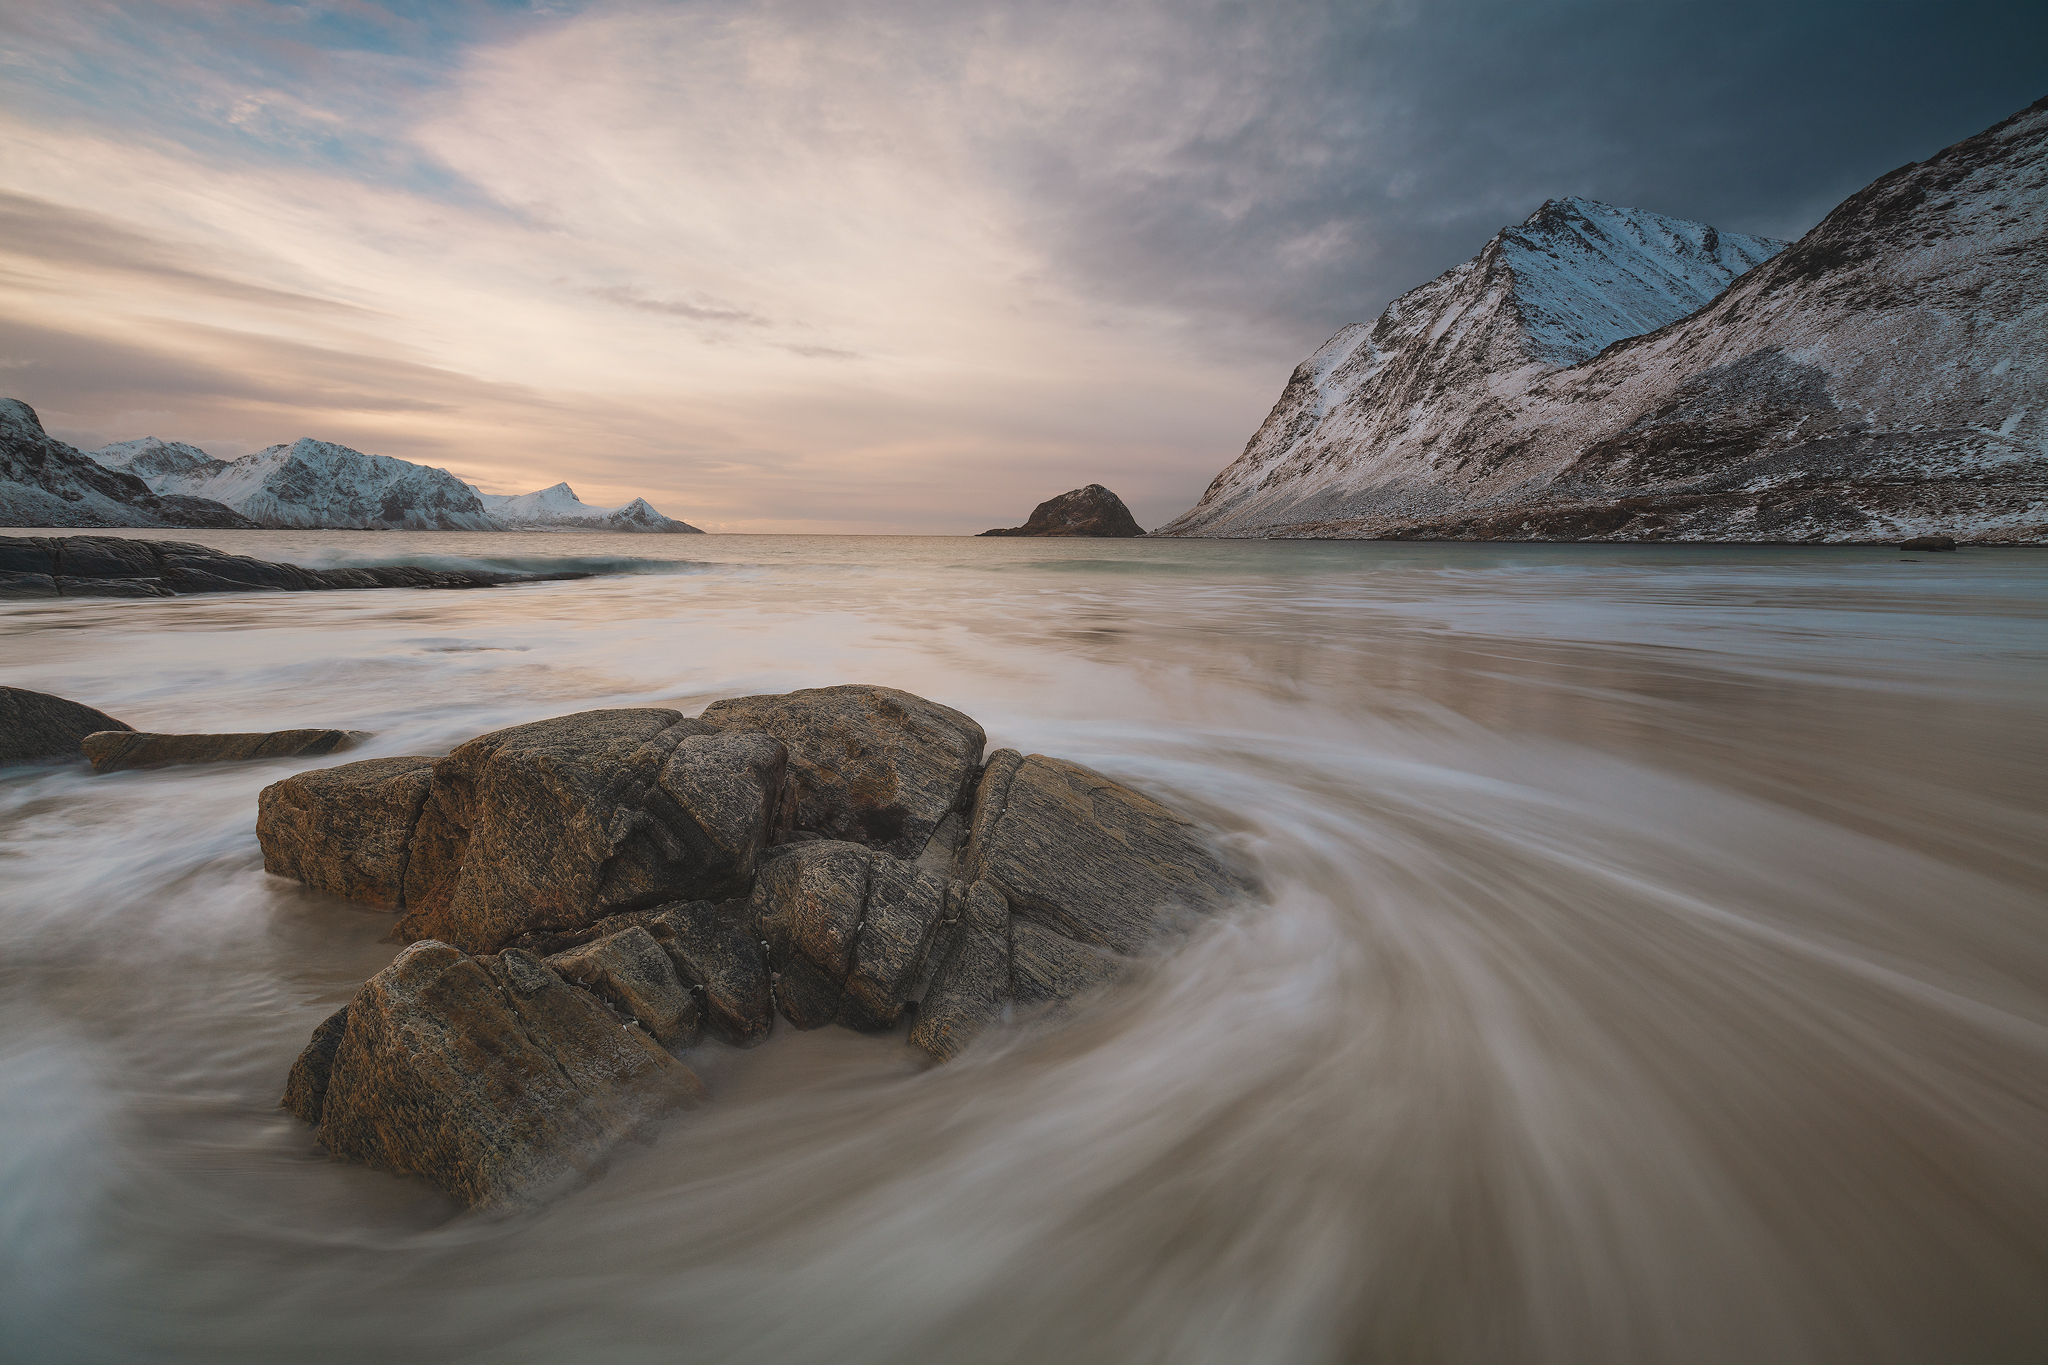 Long exposure of waves circling a rock on a mountainous background in the Lofoten Islands of Norway